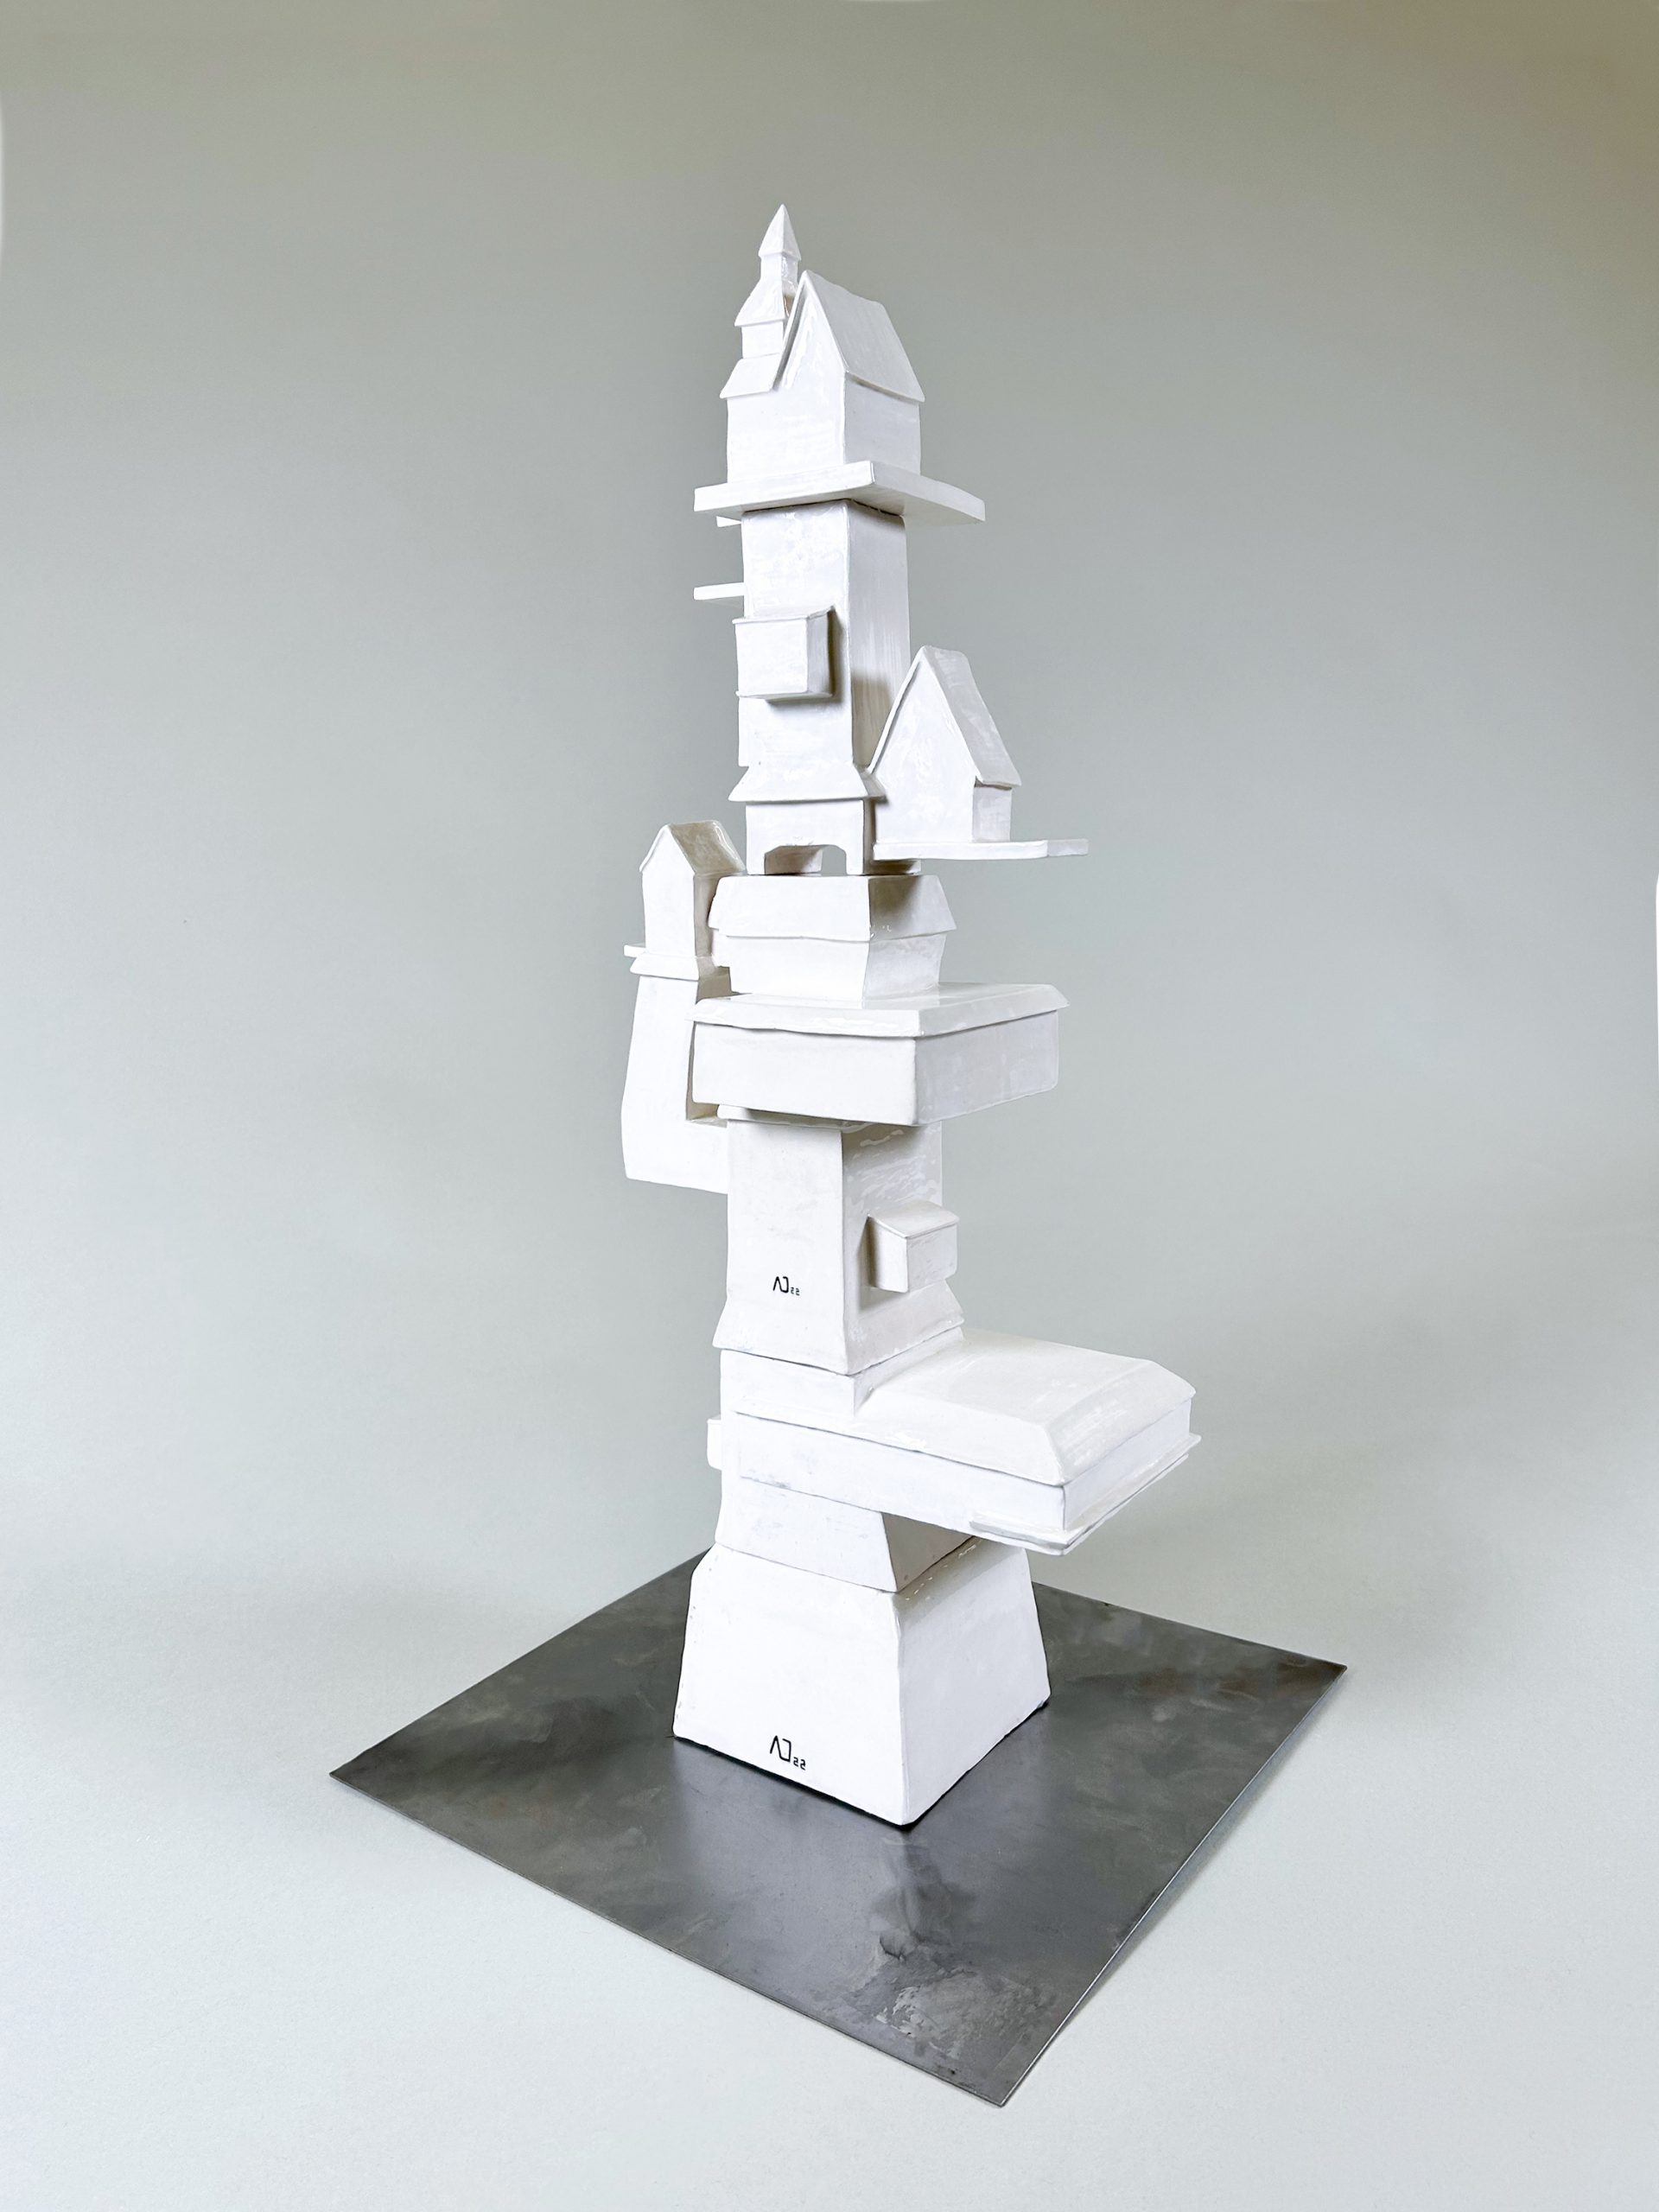 A 2-foot tall white, ceramic tower standing at a 3-quarters angle. It has a 1-foot-wide block as a foundation and becomes narrower as it approaches the top. It is topped with a house-like structure with a triangular roof. The tower has three structures that come out on the sides, attached diagonally on the opposite side of the tower. The bottom-most addition is a flat box. the middle-most is a perpendicular arm that upholds a small house-like building. Not far above is a medium-sized house-like structure on a thin base. the artist says. 